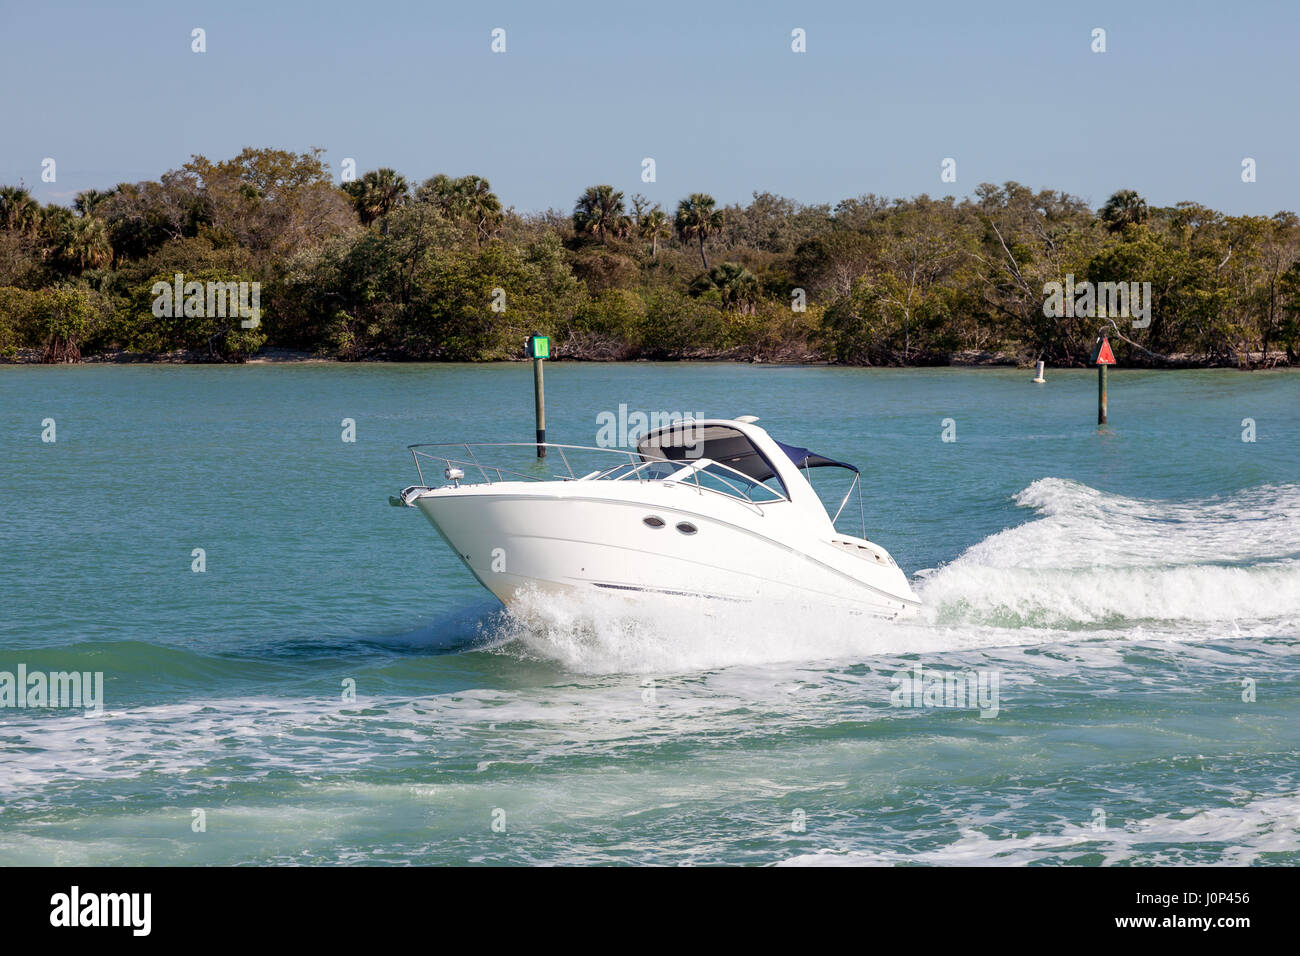 Motorbaot in the Gulf of Mexico. Mangrove forest in the background. Naples, Florida, United States Stock Photo